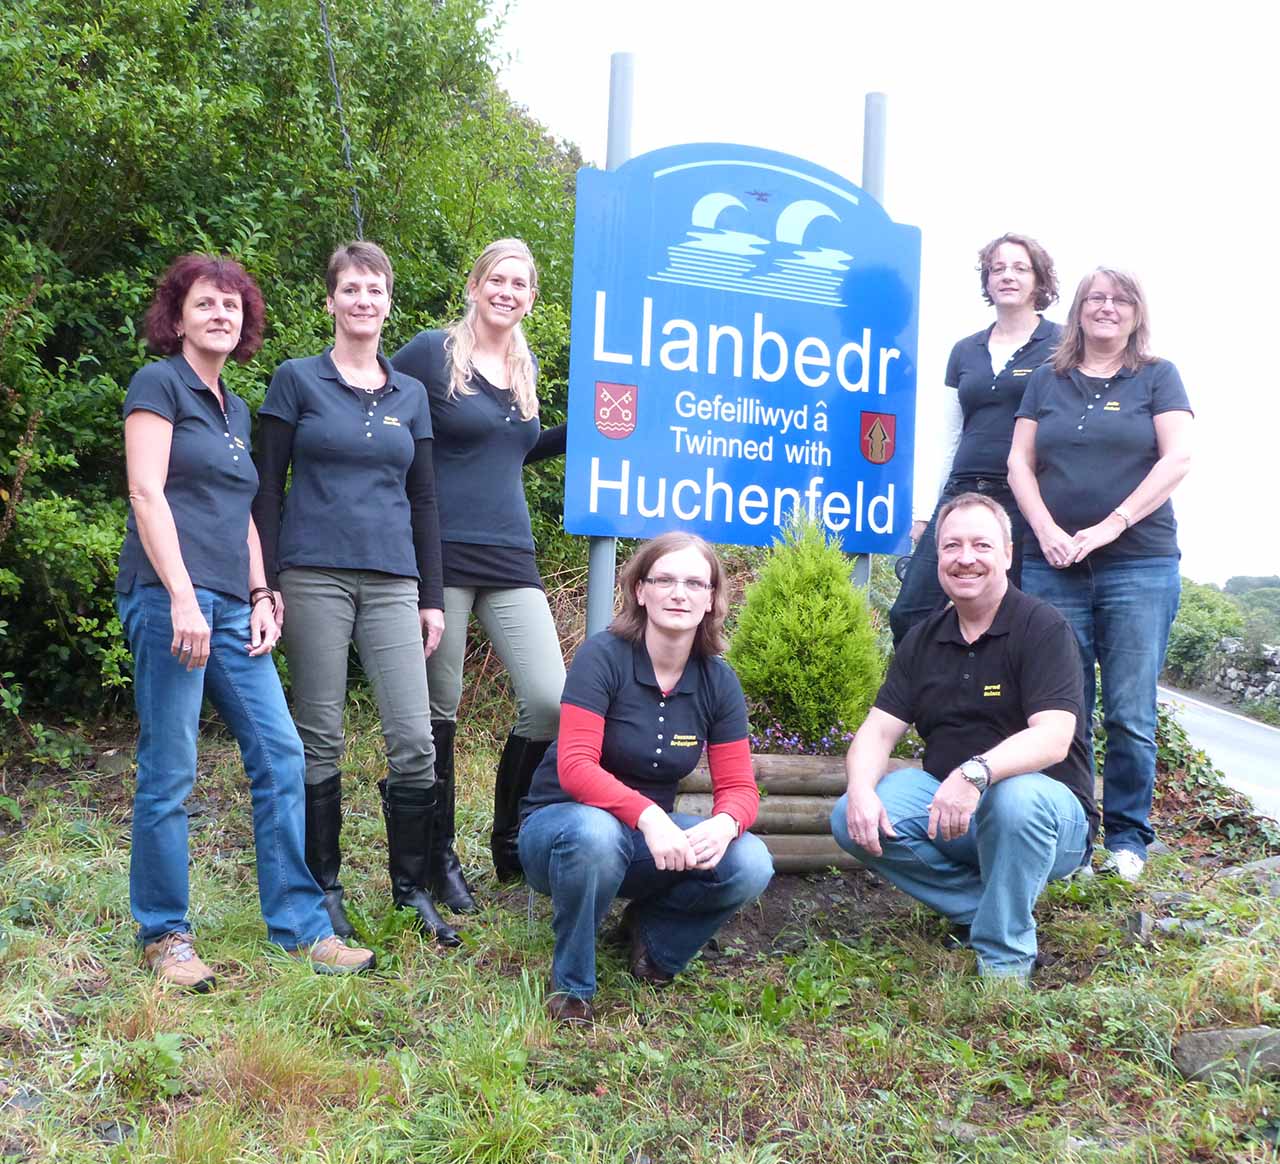 The delegation from Huchenfeld during their visit to the 2013 Llanbedr Beer Festival